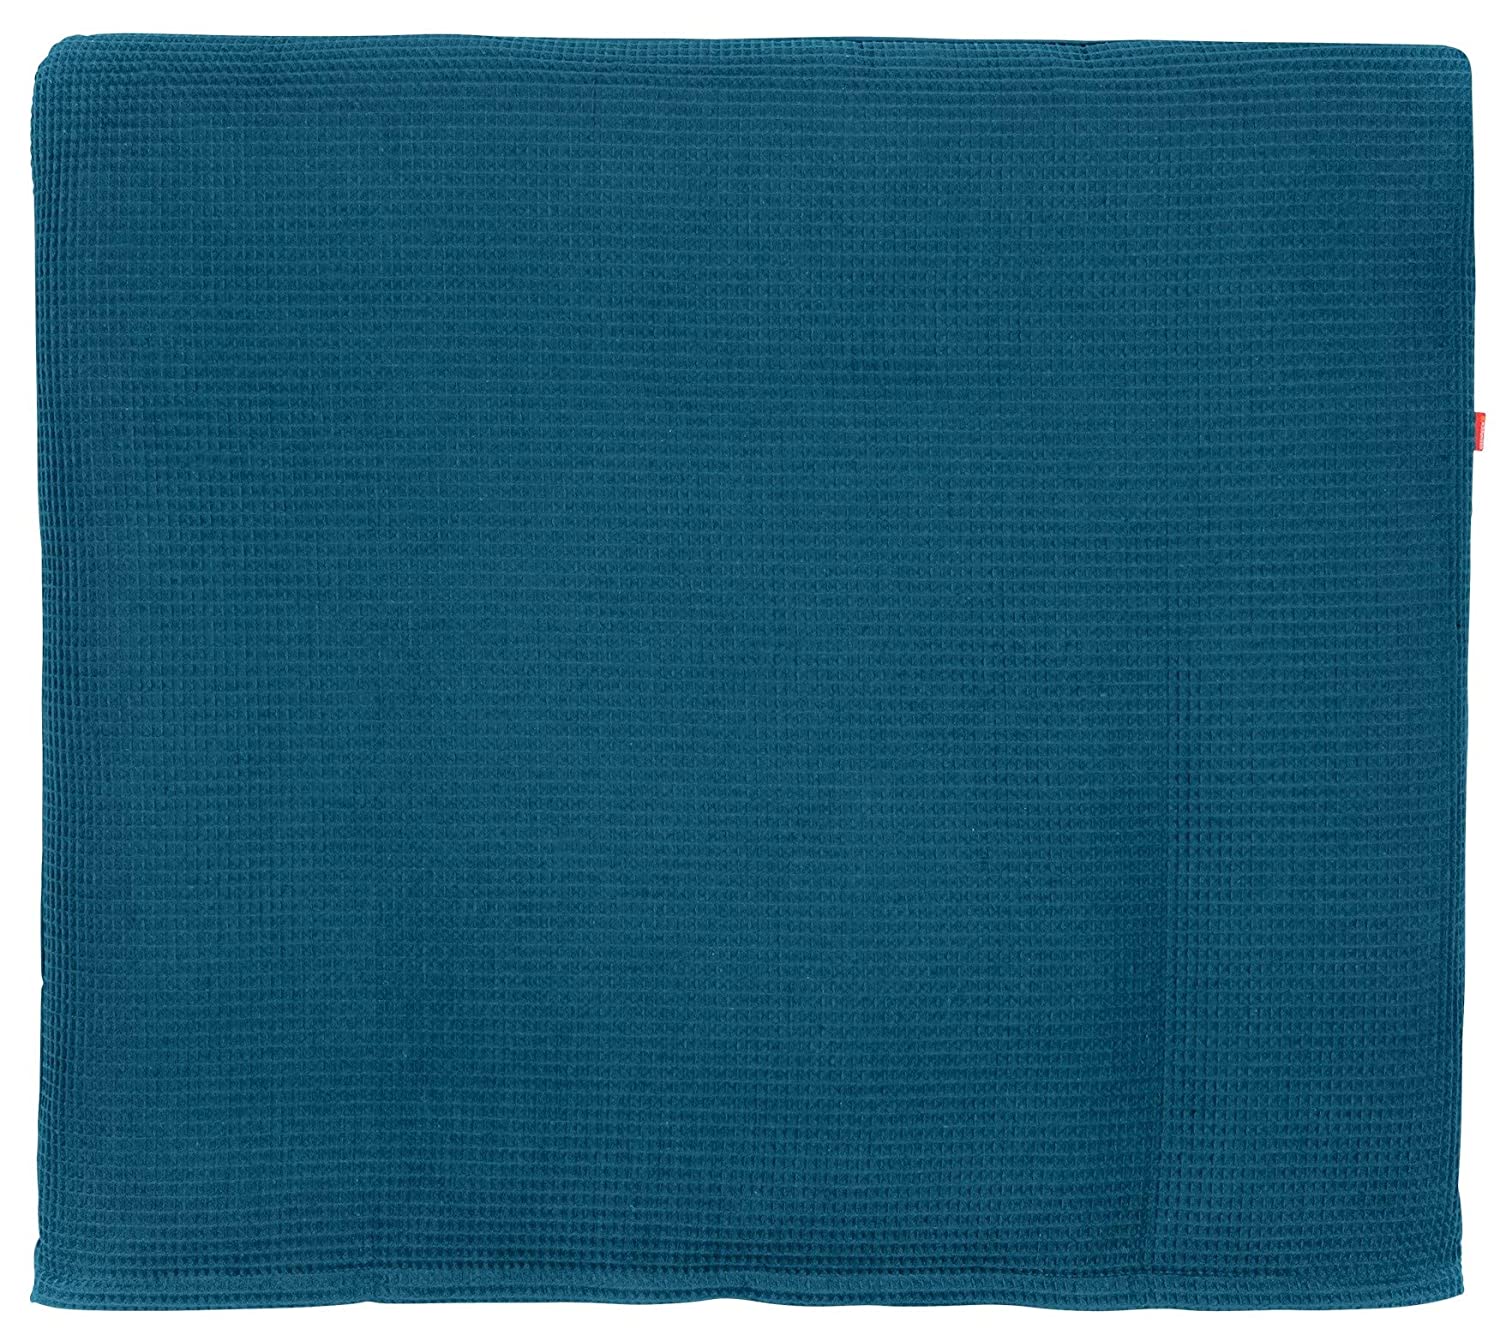 Ideenreich Ideenreich 2473 Changing Mat Cover Petrol Blue / Turquoise